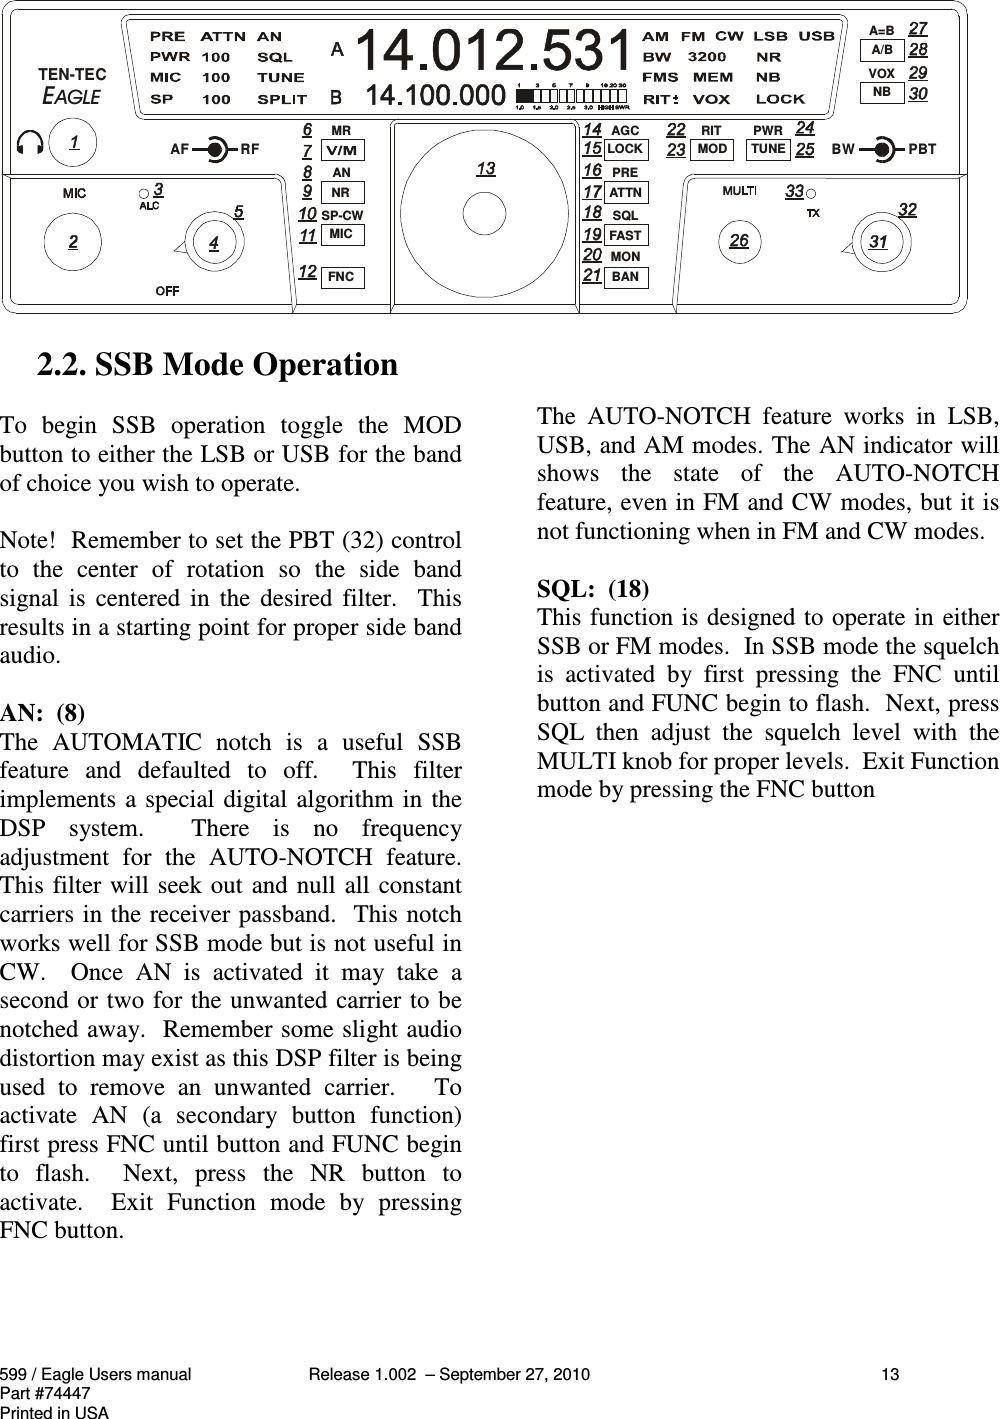 599 / Eagle Users manual Release 1.002  – September 27, 2010 13Part #74447Printed in USA2.2. SSB Mode OperationTo  begin  SSB  operation  toggle  the  MODbutton to either the LSB or USB for the bandof choice you wish to operate.Note!  Remember to set the PBT (32) controlto  the  center  of  rotation  so  the  side  bandsignal is  centered in  the  desired  filter.    Thisresults in a starting point for proper side bandaudio.AN:  (8)The  AUTOMATIC  notch  is  a  useful  SSBfeature  and  defaulted  to  off.    This  filterimplements a special digital algorithm in theDSP  system.    There  is  no  frequencyadjustment  for  the  AUTO-NOTCH  feature.This filter will seek out and null all constantcarriers in the receiver passband.  This notchworks well for SSB mode but is not useful inCW.    Once  AN  is  activated  it  may  take  asecond or two for the unwanted carrier to benotched away.  Remember some slight audiodistortion may exist as this DSP filter is beingused  to  remove  an  unwanted  carrier.      Toactivate  AN  (a  secondary  button  function)first press FNC until button and FUNC beginto  flash.    Next,  press  the  NR  button  toactivate.    Exit  Function  mode  by  pressingFNC button.The  AUTO-NOTCH  feature  works  in  LSB,USB, and AM modes. The AN indicator willshows  the  state  of  the  AUTO-NOTCHfeature, even in FM and CW modes, but it isnot functioning when in FM and CW modes.SQL:  (18)This function is designed to operate in eitherSSB or FM modes.  In SSB mode the squelchis  activated  by  first  pressing  the  FNC  untilbutton and FUNC begin to flash.  Next, pressSQL  then  adjust  the  squelch  level  with  theMULTI knob for proper levels.  Exit Functionmode by pressing the FNC button  TEN-TECAF RFMRANSP-CWBWPBTA=BVOXPWRRITAGCPRESQLMON NRMICFNCLOCKATTNFASTBANMOD TUNEA/BNB